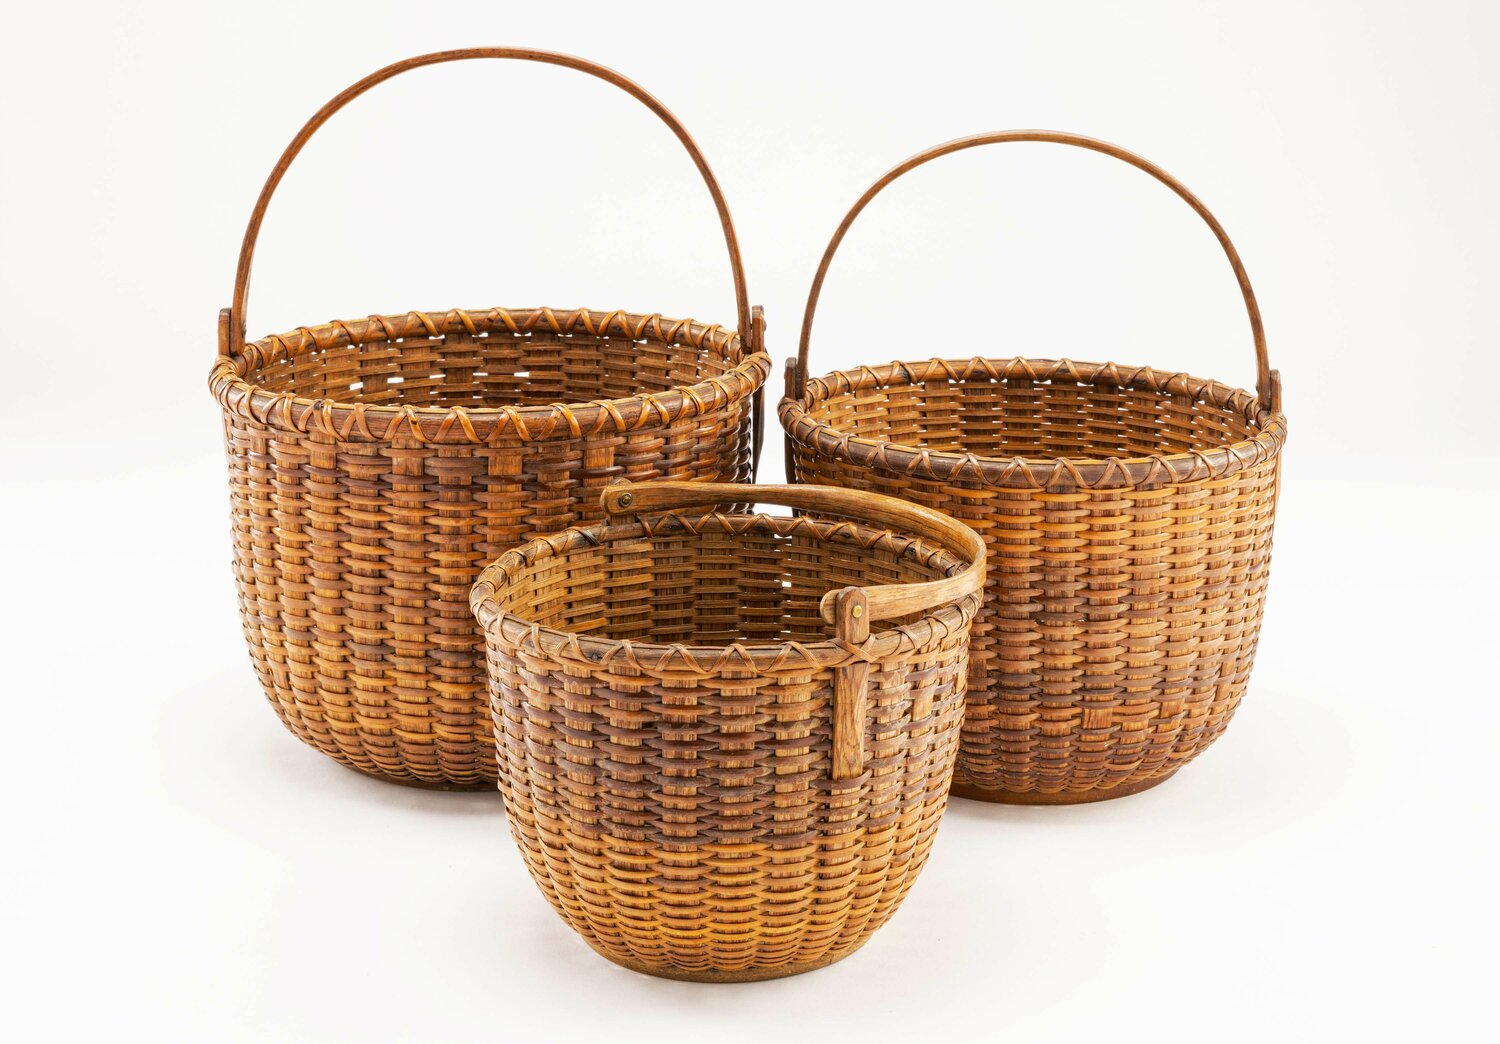 The Hadwen House will host an exhibit of Nantucket lightship baskets this summer.